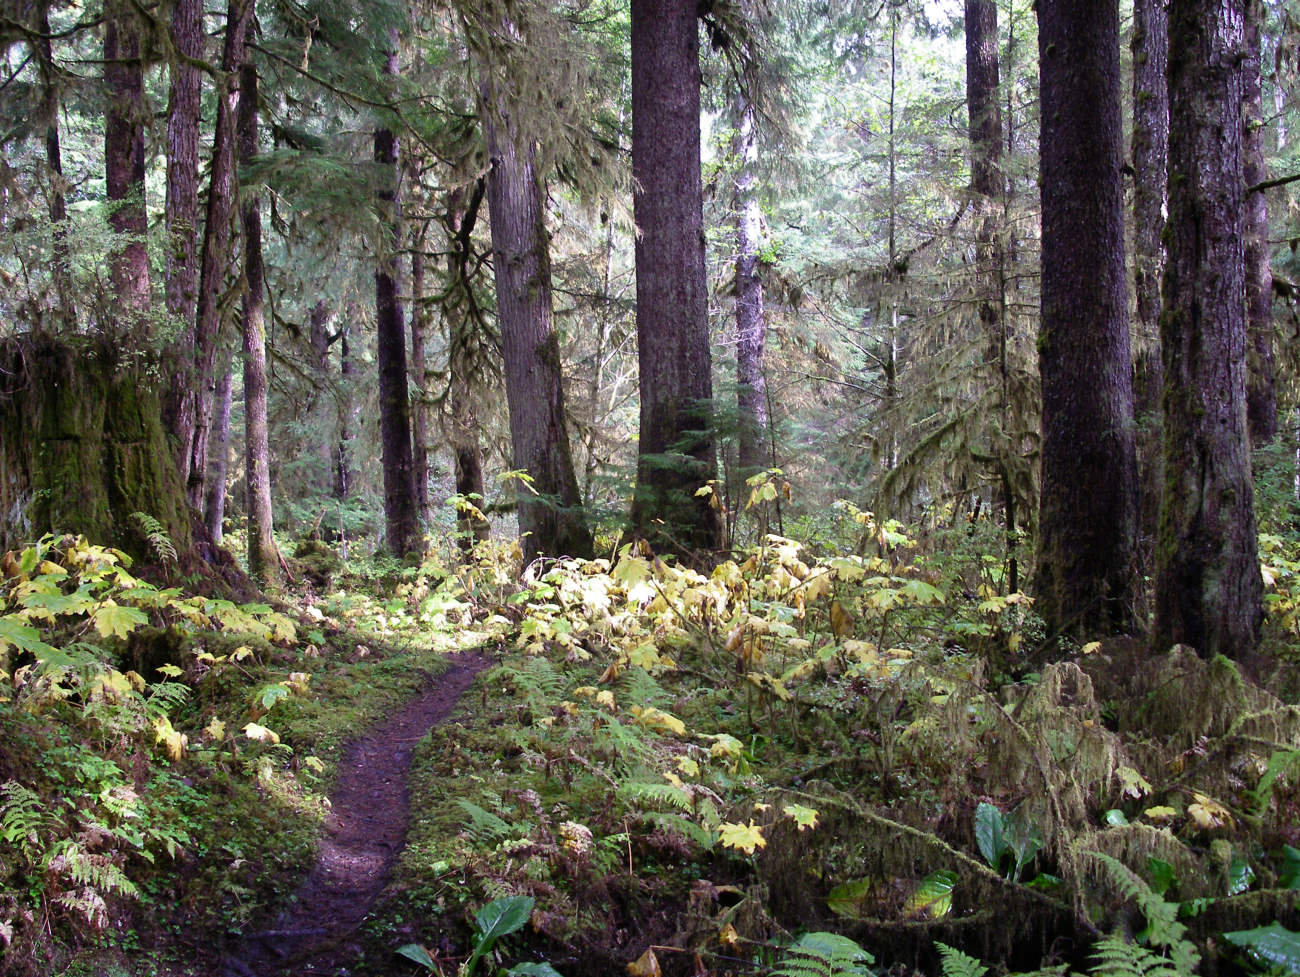 A trail through the woods in the Lunch Creek area of Ketchikan